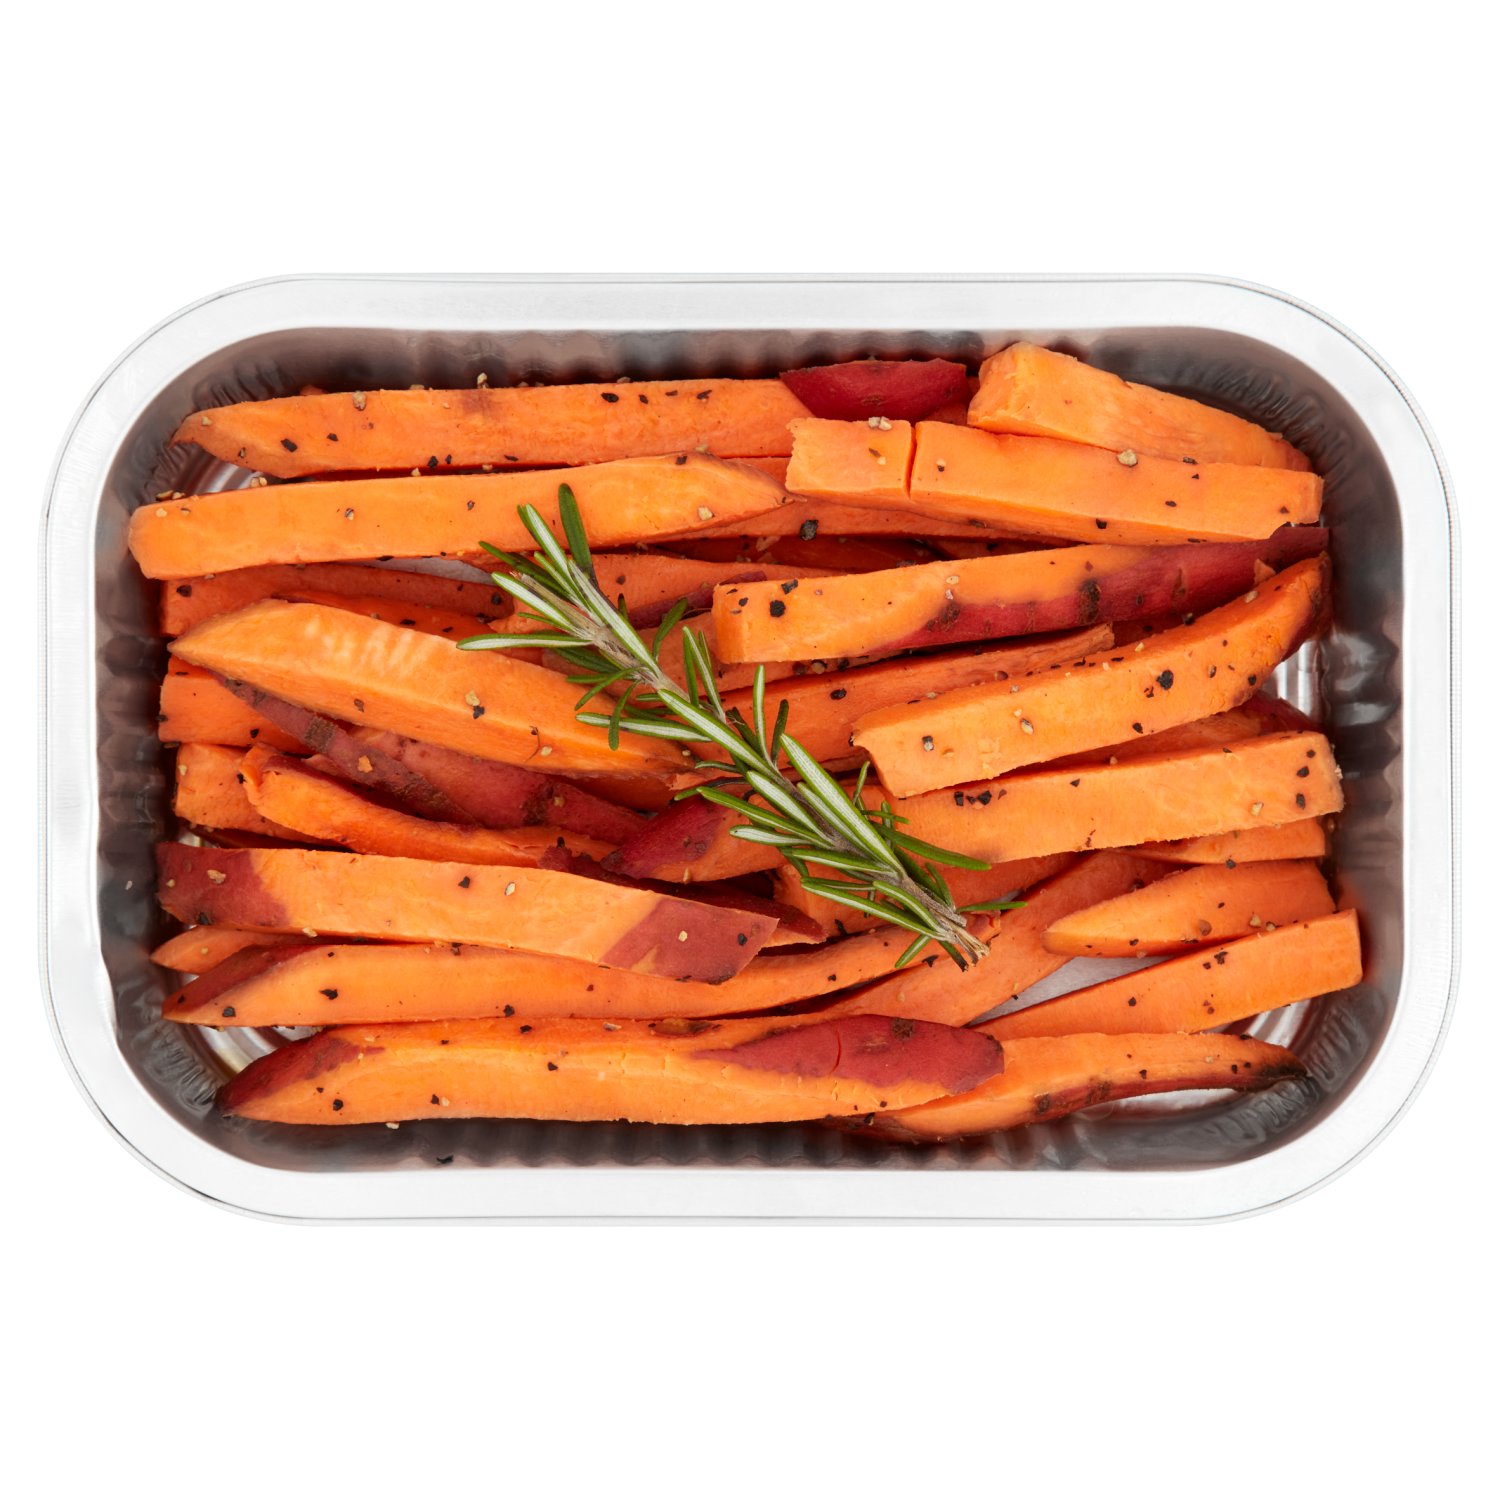 Prepared by our Butcher Sweet Potato Fries (1 Piece)